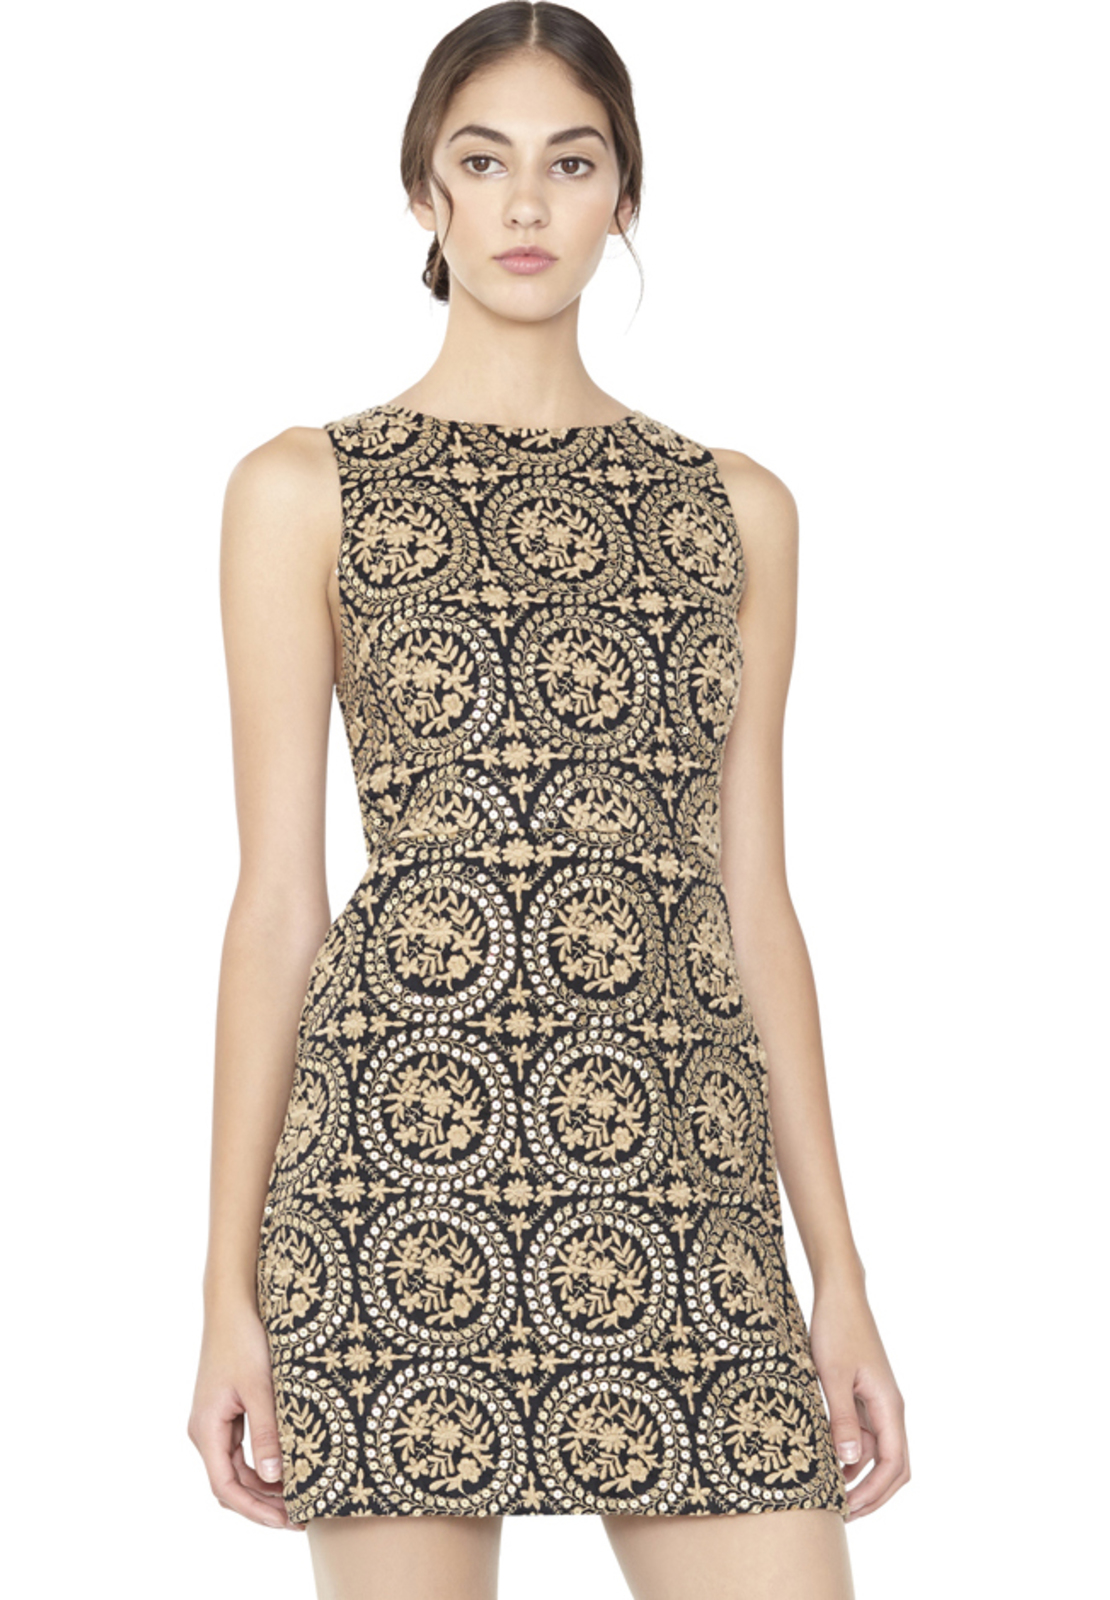 alice and olivia black and gold dress